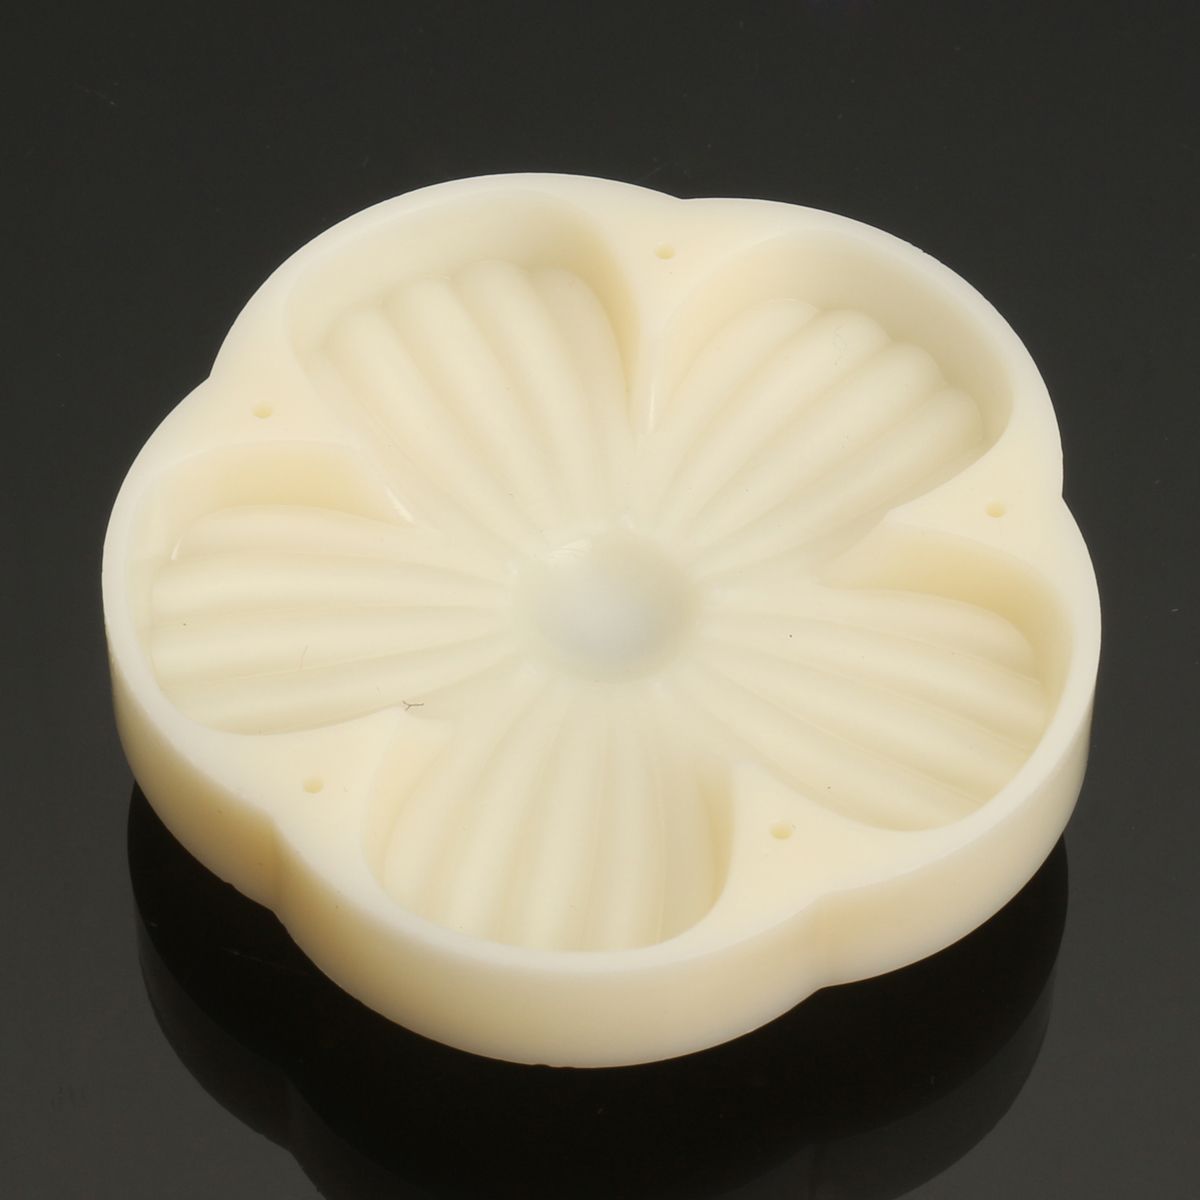 50g-6-Patterns-Moon-Cake-Mold-Round-Flower-Mould-Baking-Tool-Mid-Autumn-Festival-DIY-Decoration-1341003